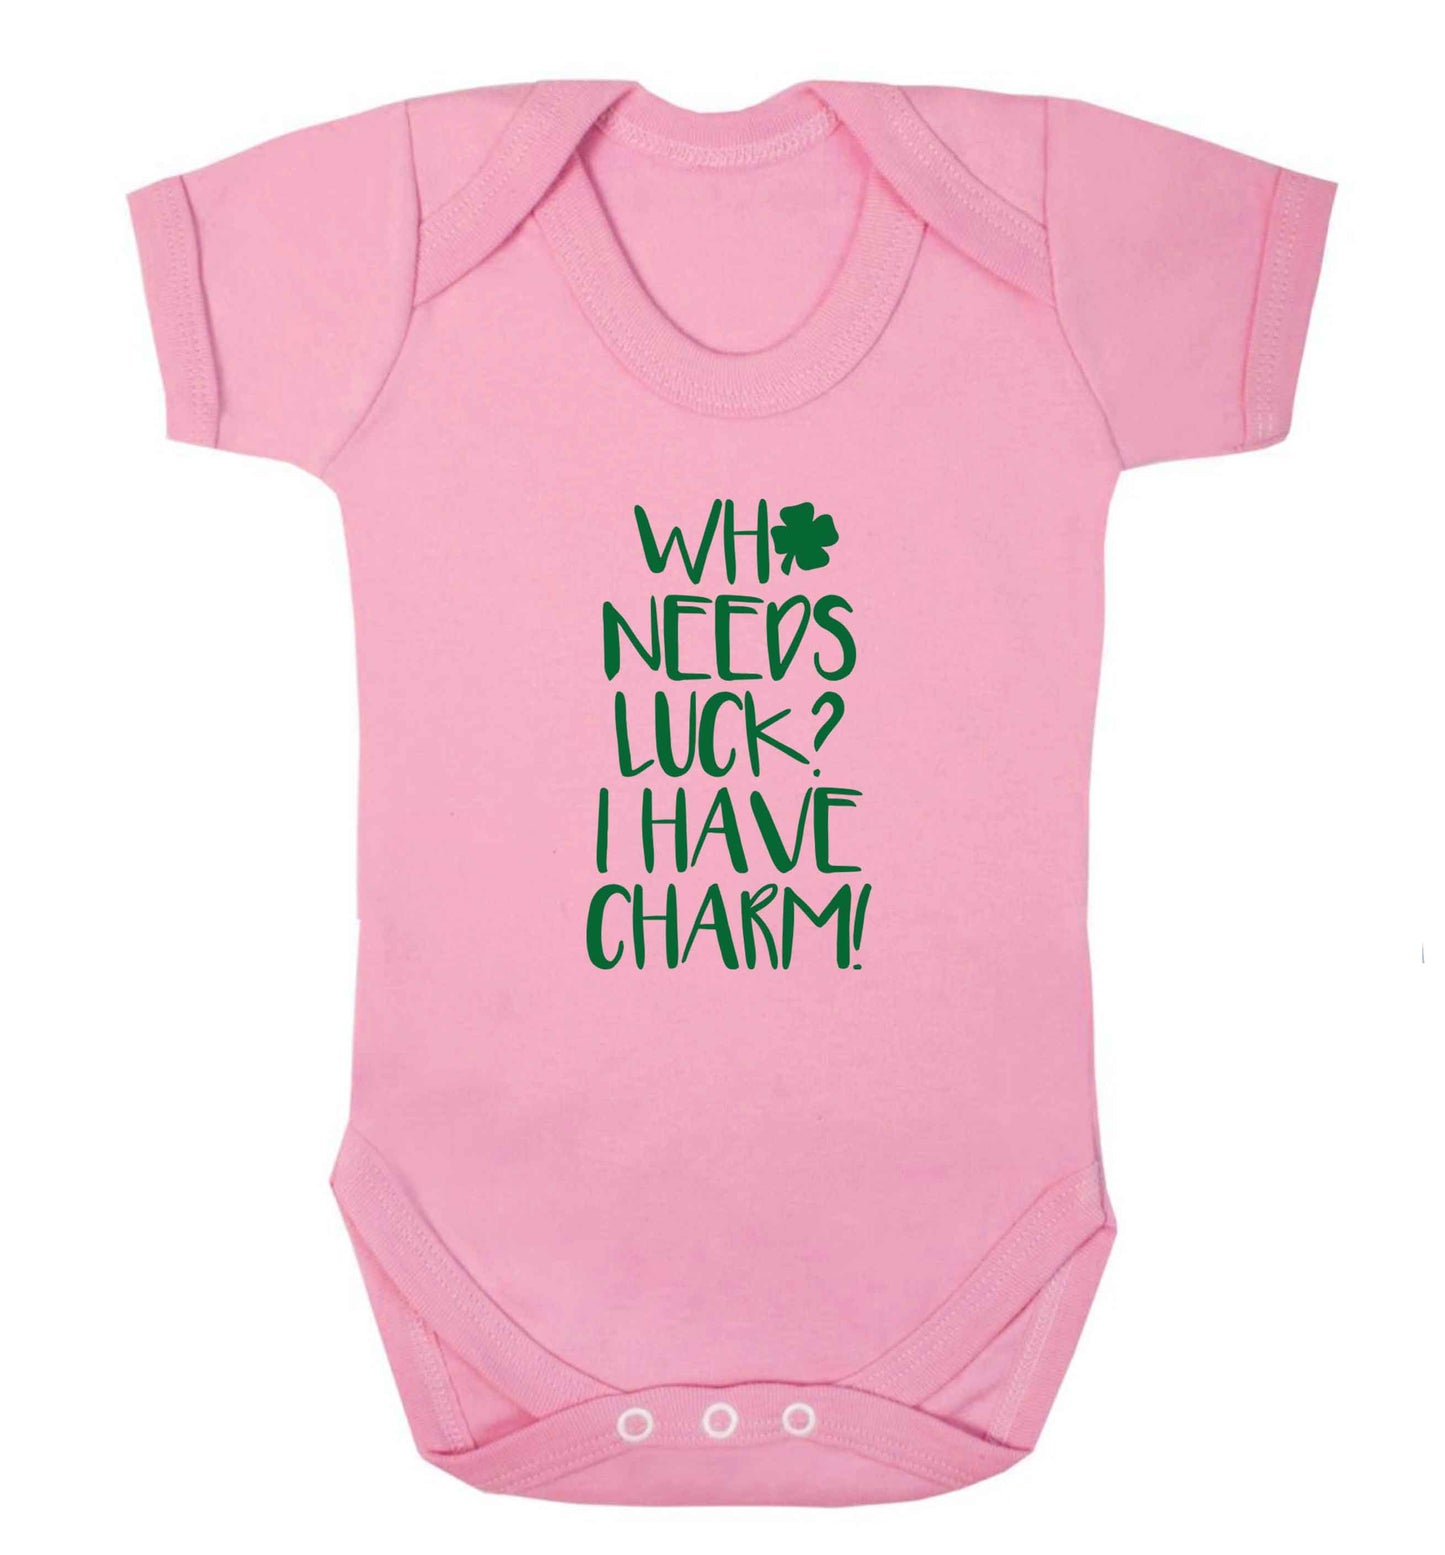 Who needs luck? I have charm! baby vest pale pink 18-24 months